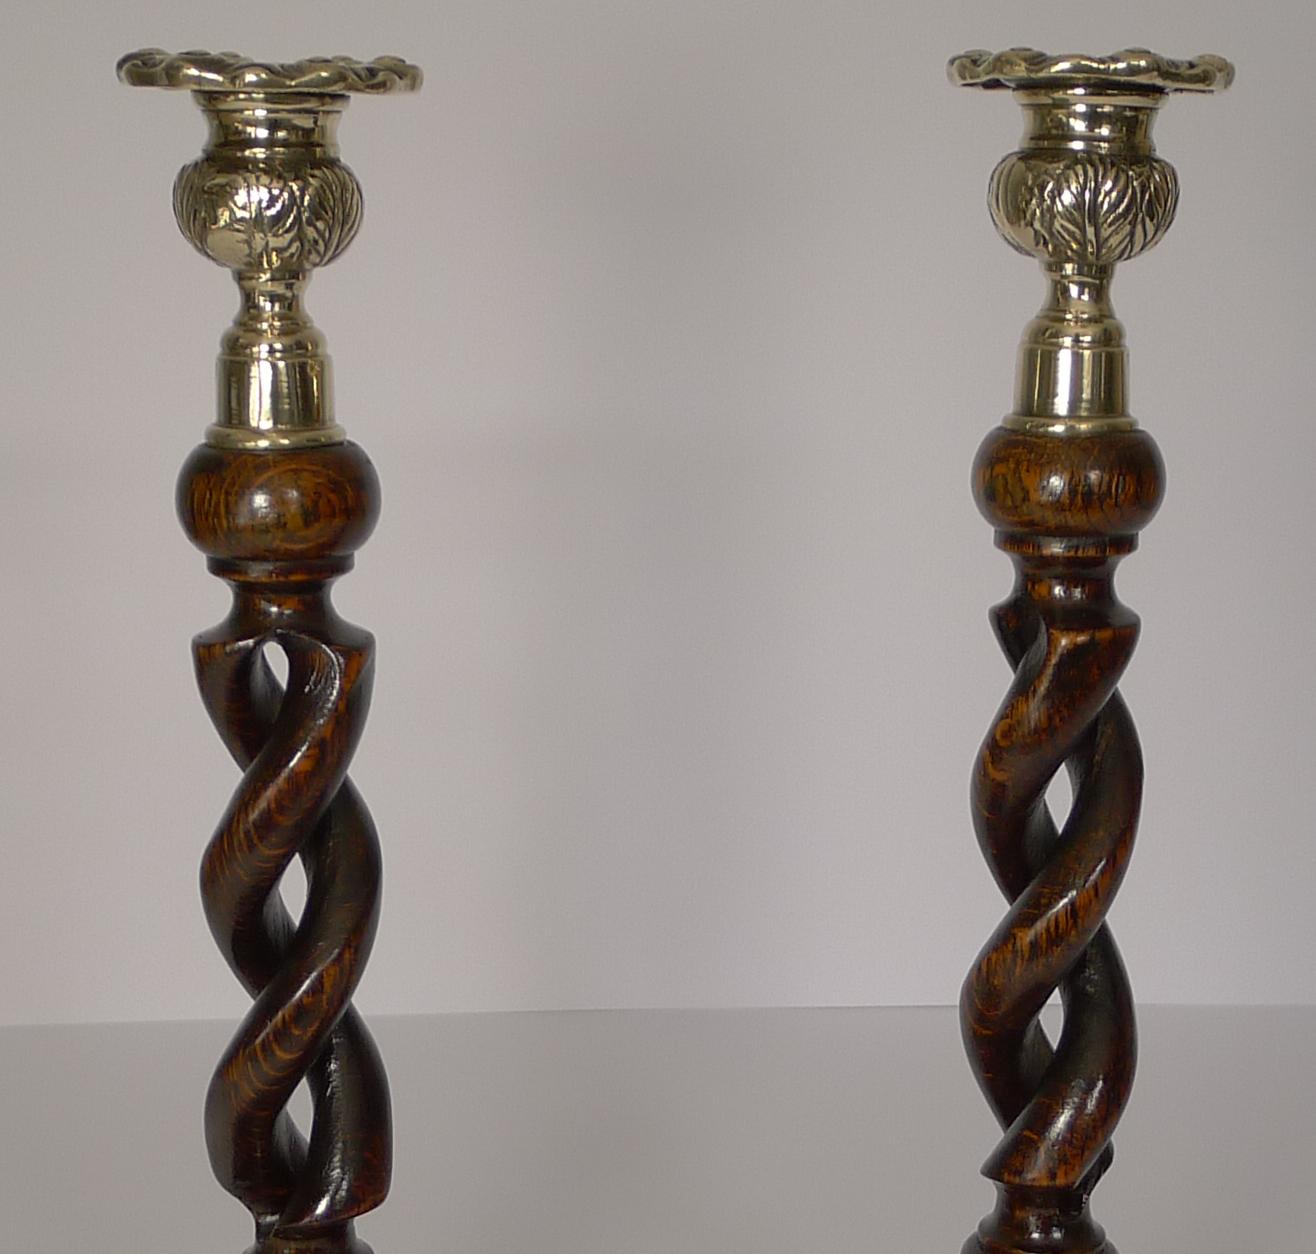 A wonderful pair of wooden candlesticks, always a winning combination, polished oak and brass and in a 9